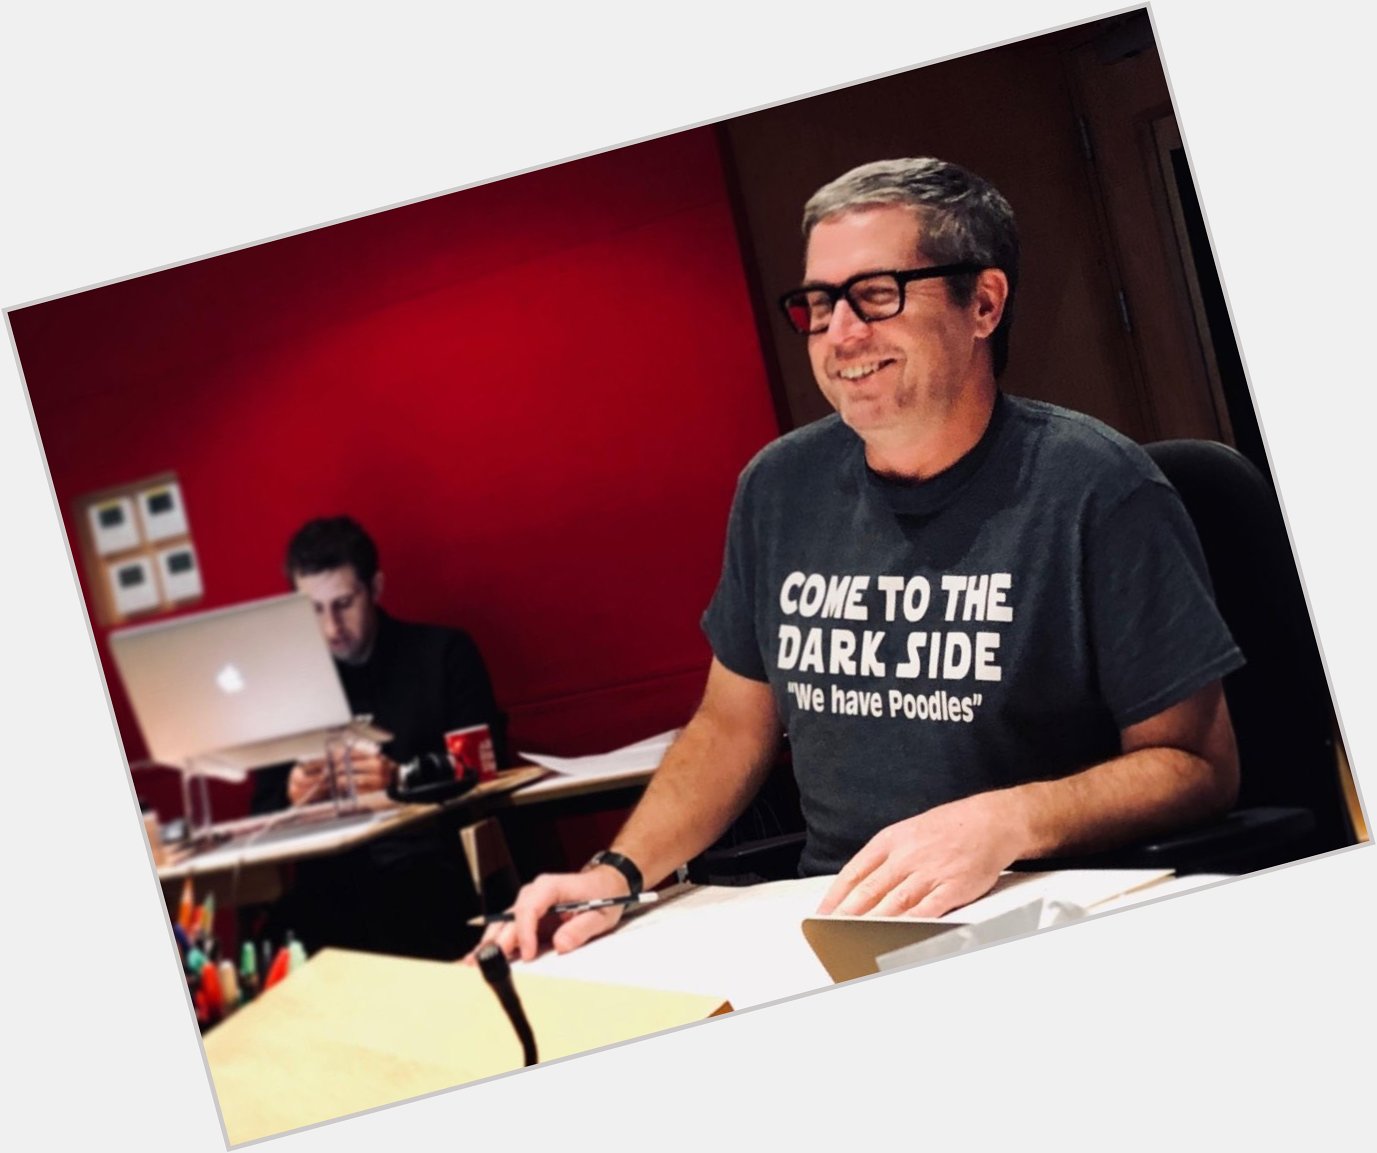 Happy birthday to John Powell, who composed the score for Solo: A Star Wars Story. May the Force be with you! 